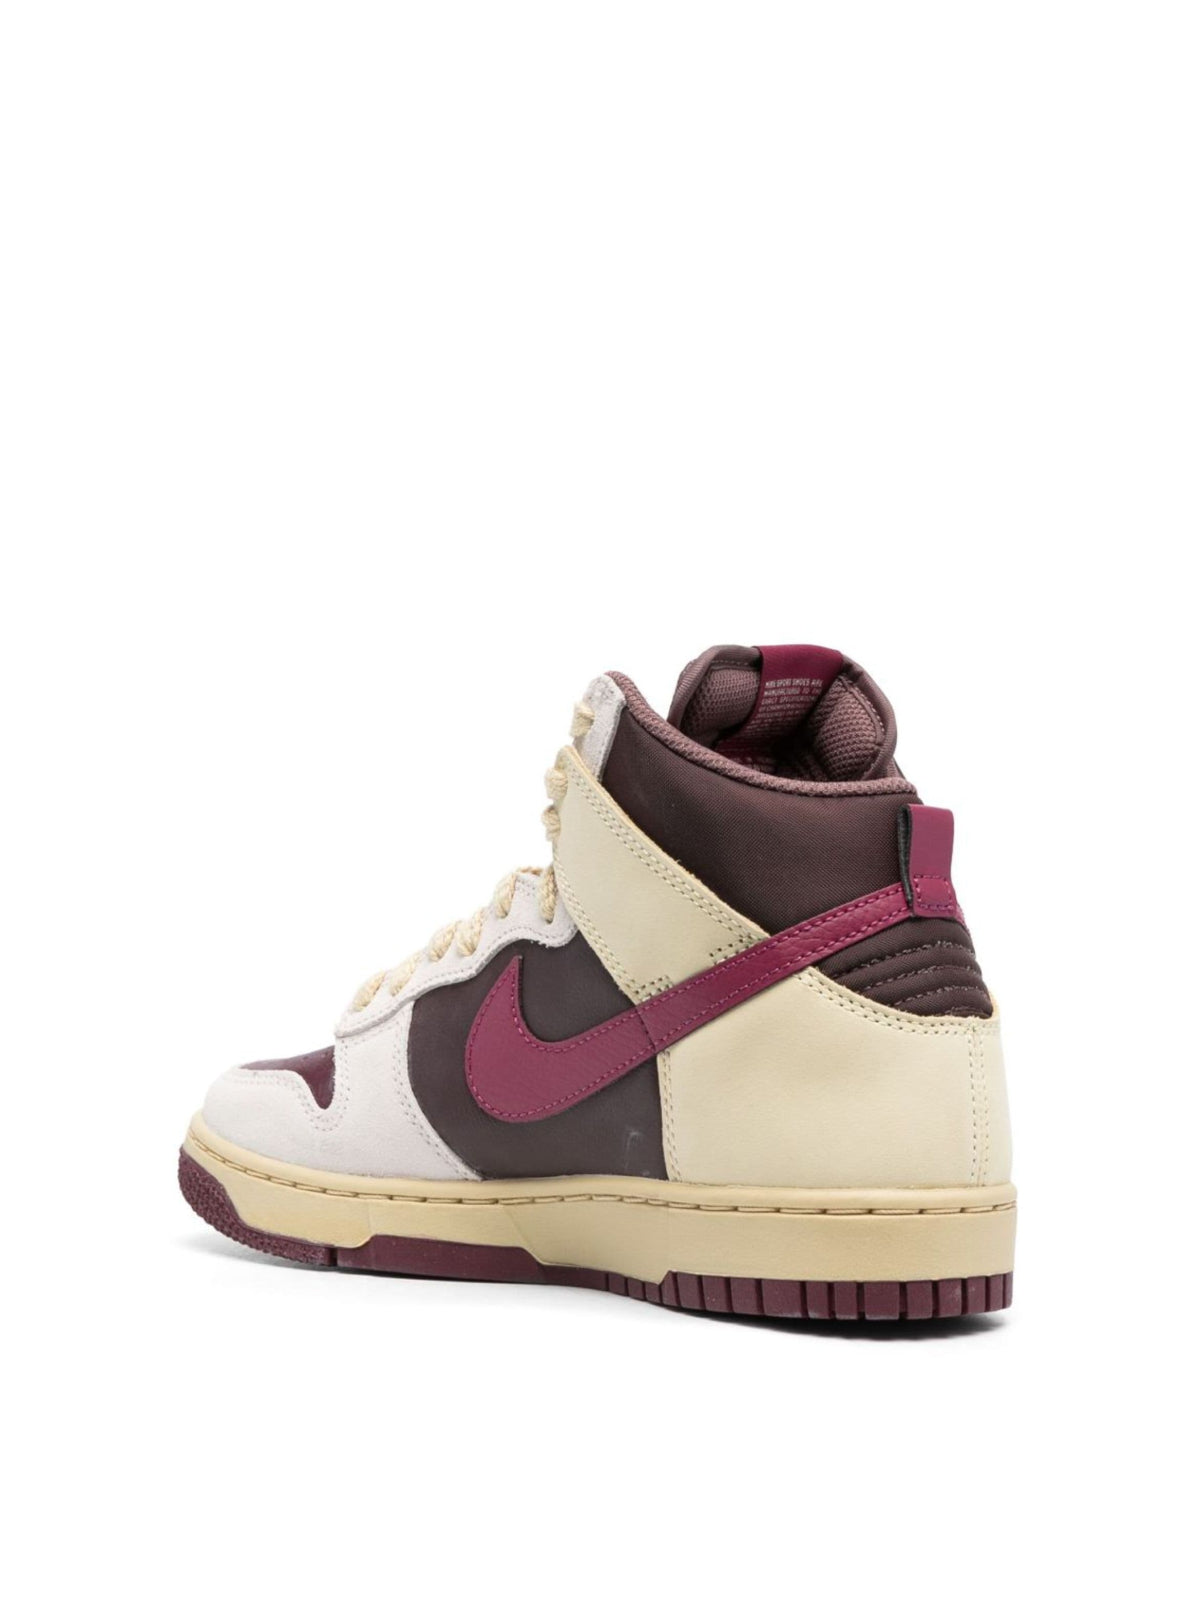 Nike-OUTLET-SALE-Dunk High 1985 Sneakers-ARCHIVIST